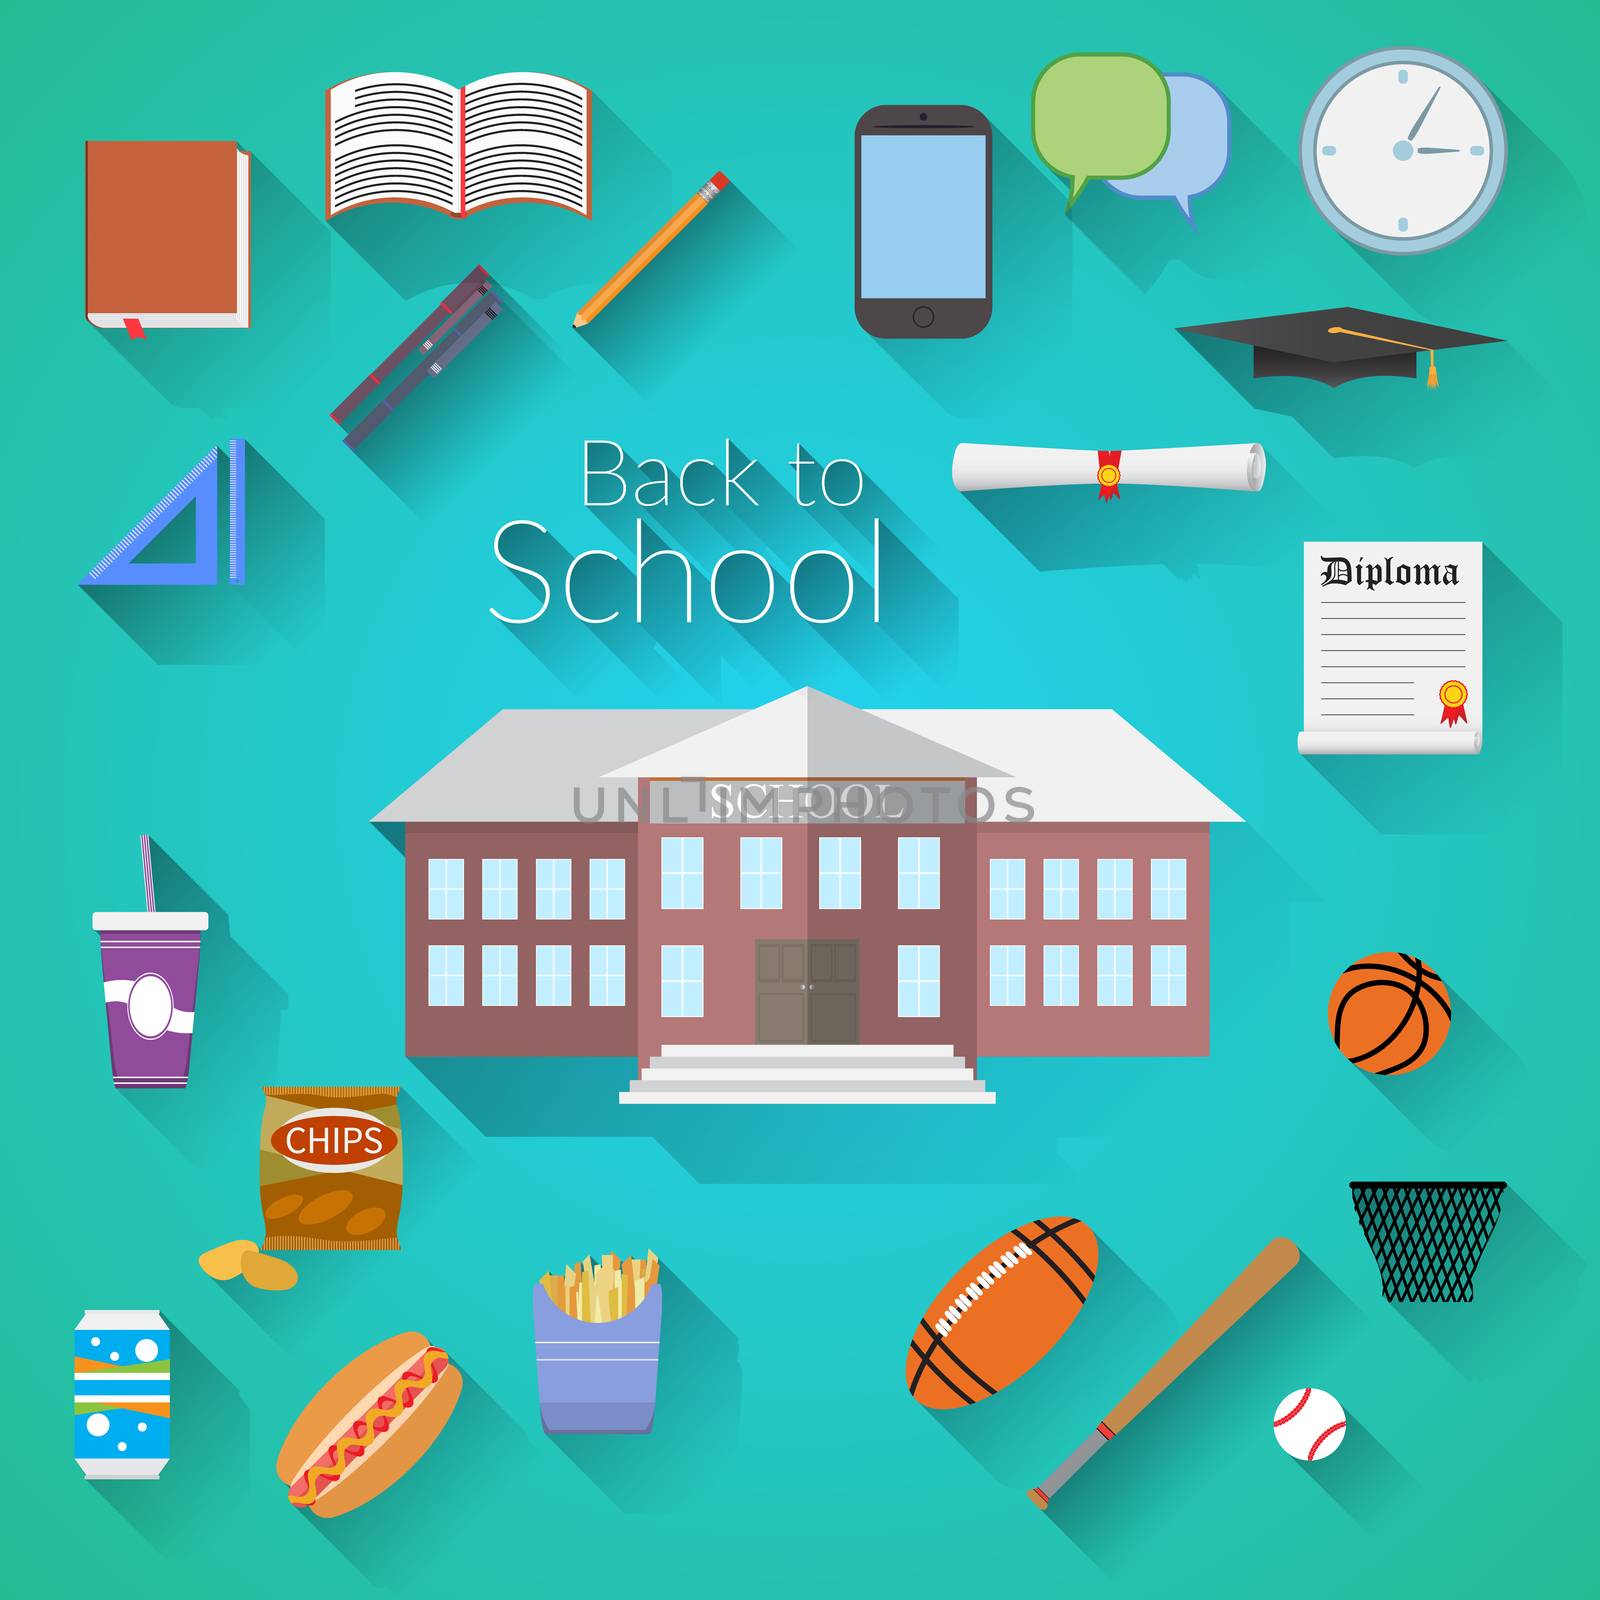 Back to School Flat design modern vector illustration, school building, pen, pensil, food, sport items, diploma and graduation cap icons with long shadow